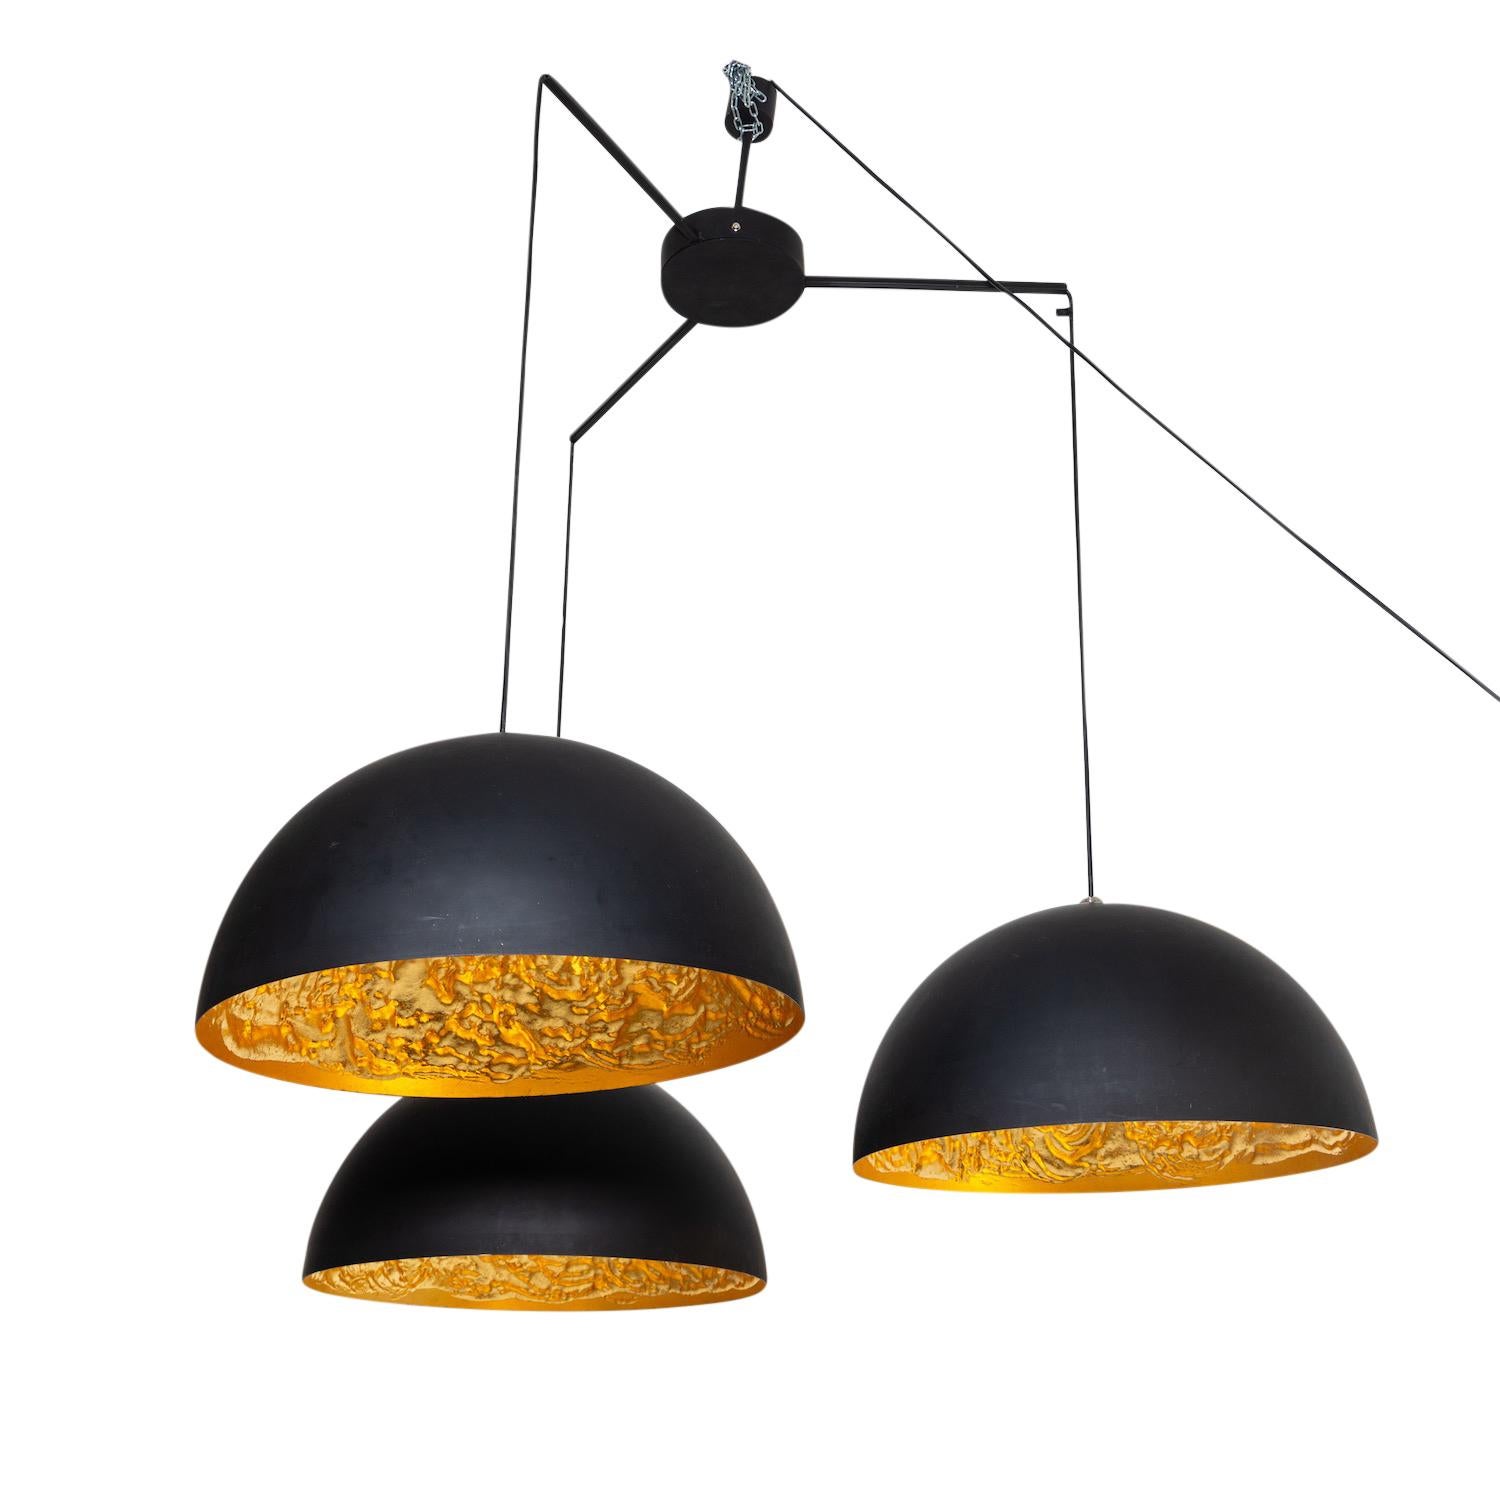 A black-gold, vintage late Mid-Century Modern Italian ceiling light, lamp made of handcrafted polished metal, designed and produced by Catellani & Smith in good condition. The chandelier, pendant is consisting three round hemispherical shades with